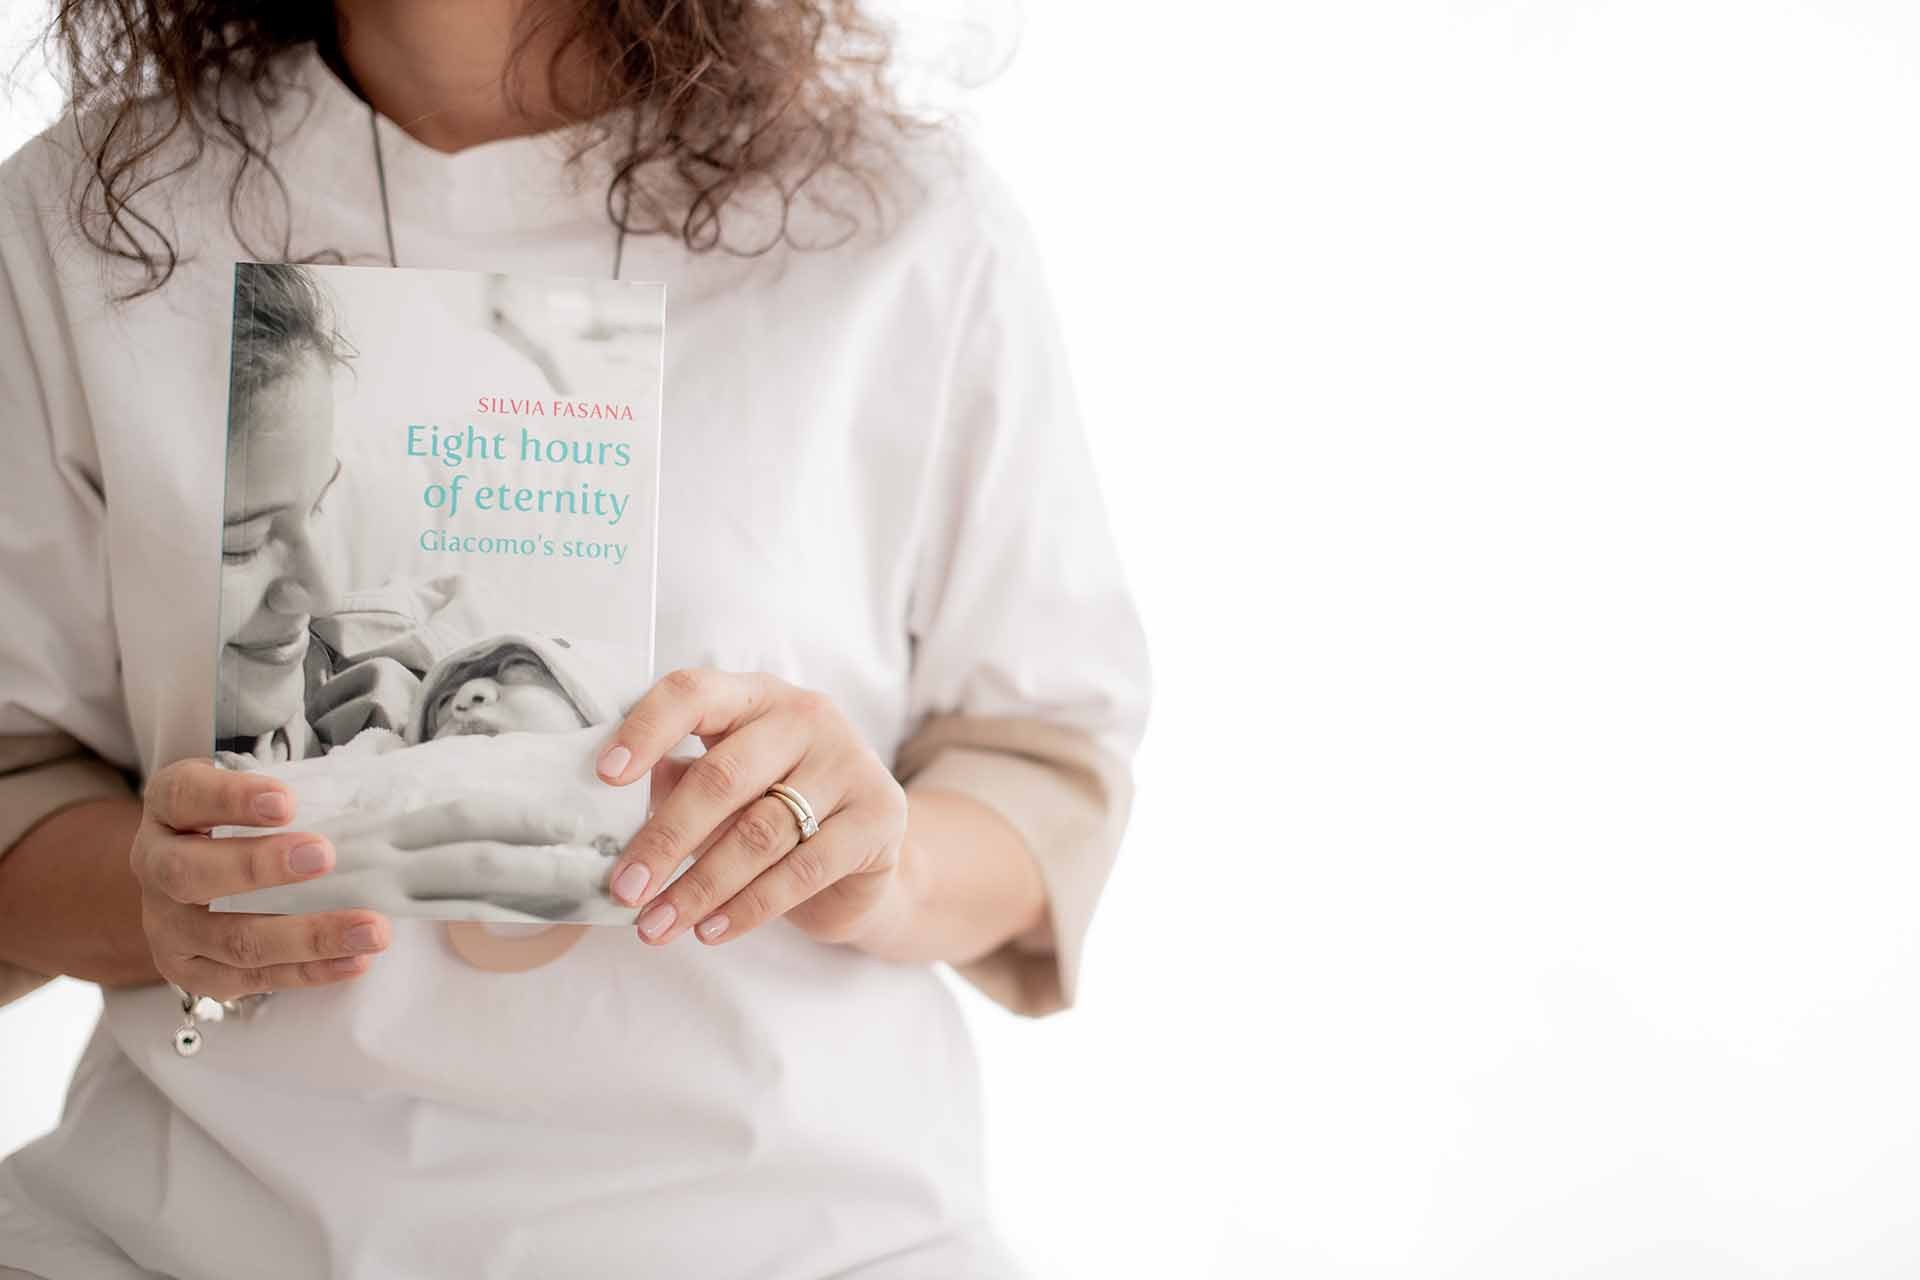 Silvia Fasana holding her book - Eight Hours of Eternity